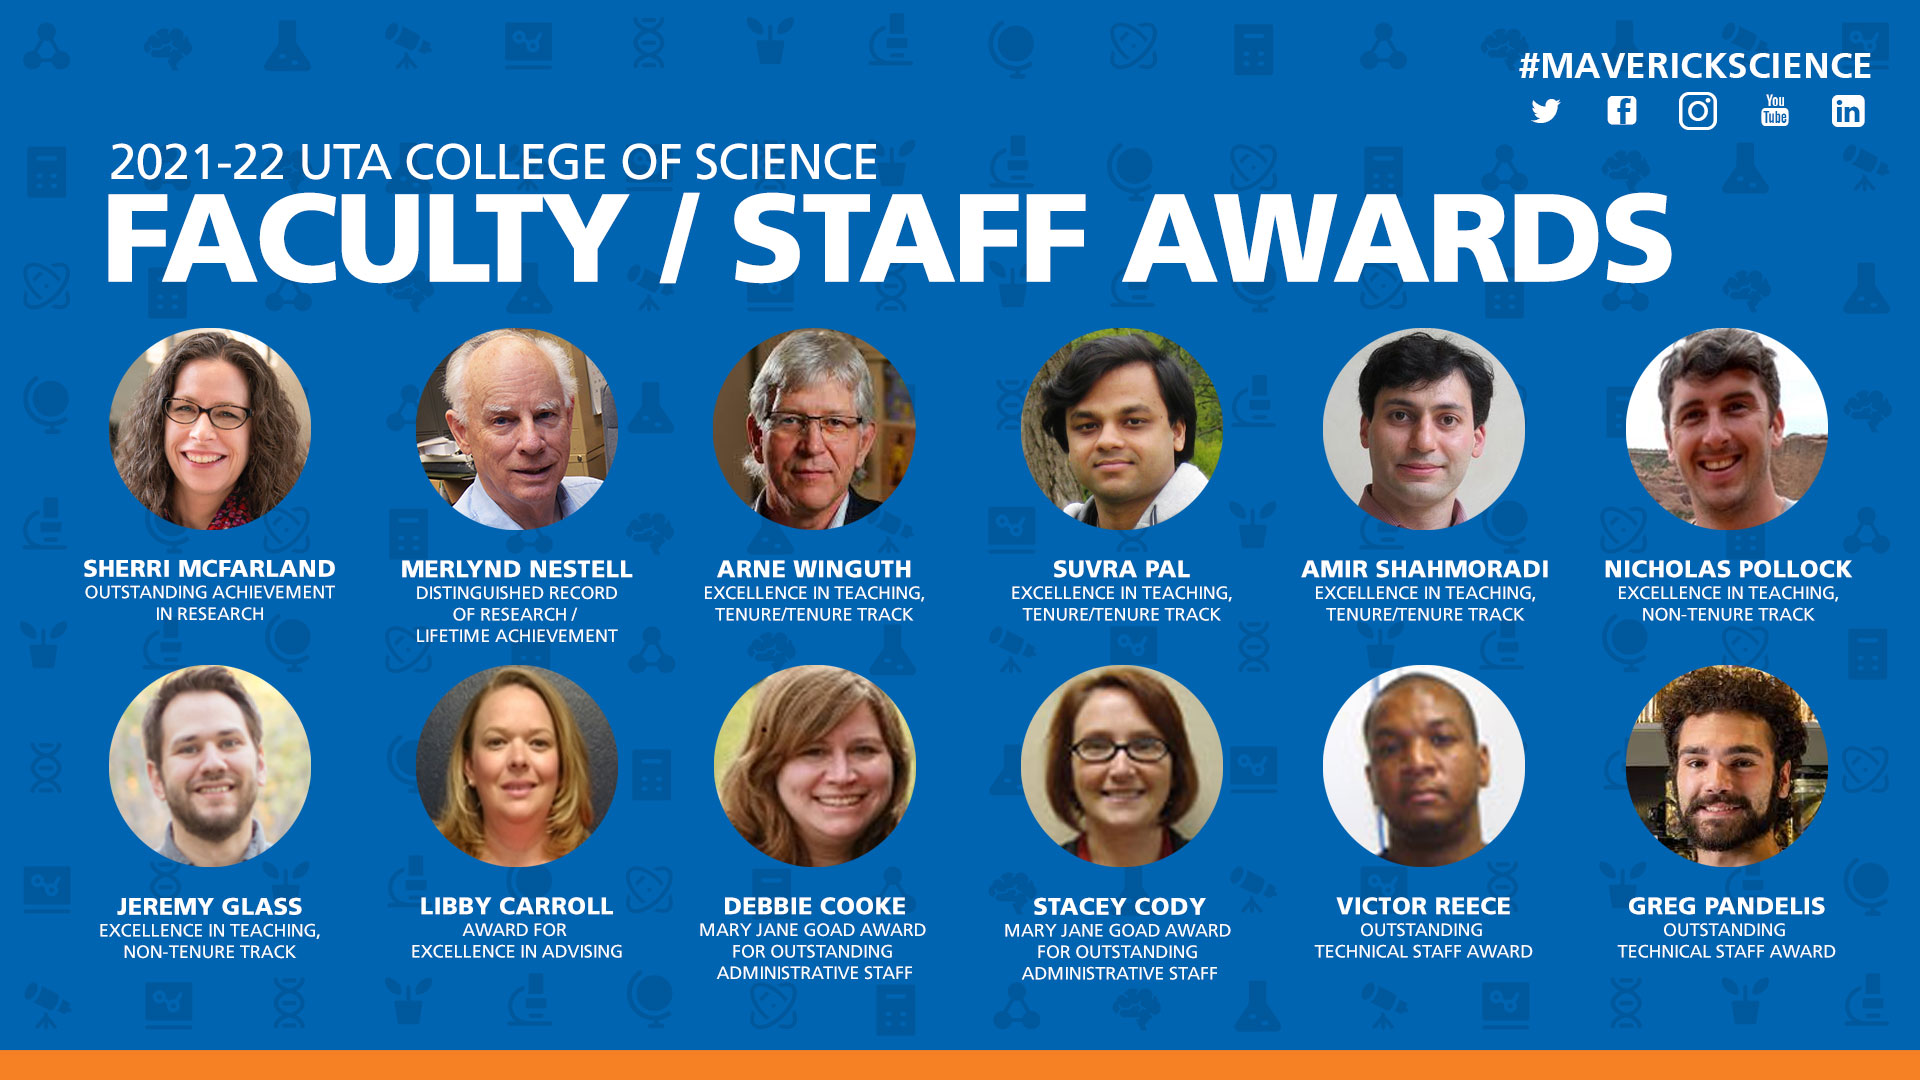 College presents annual awards in teaching, research, advising, and service